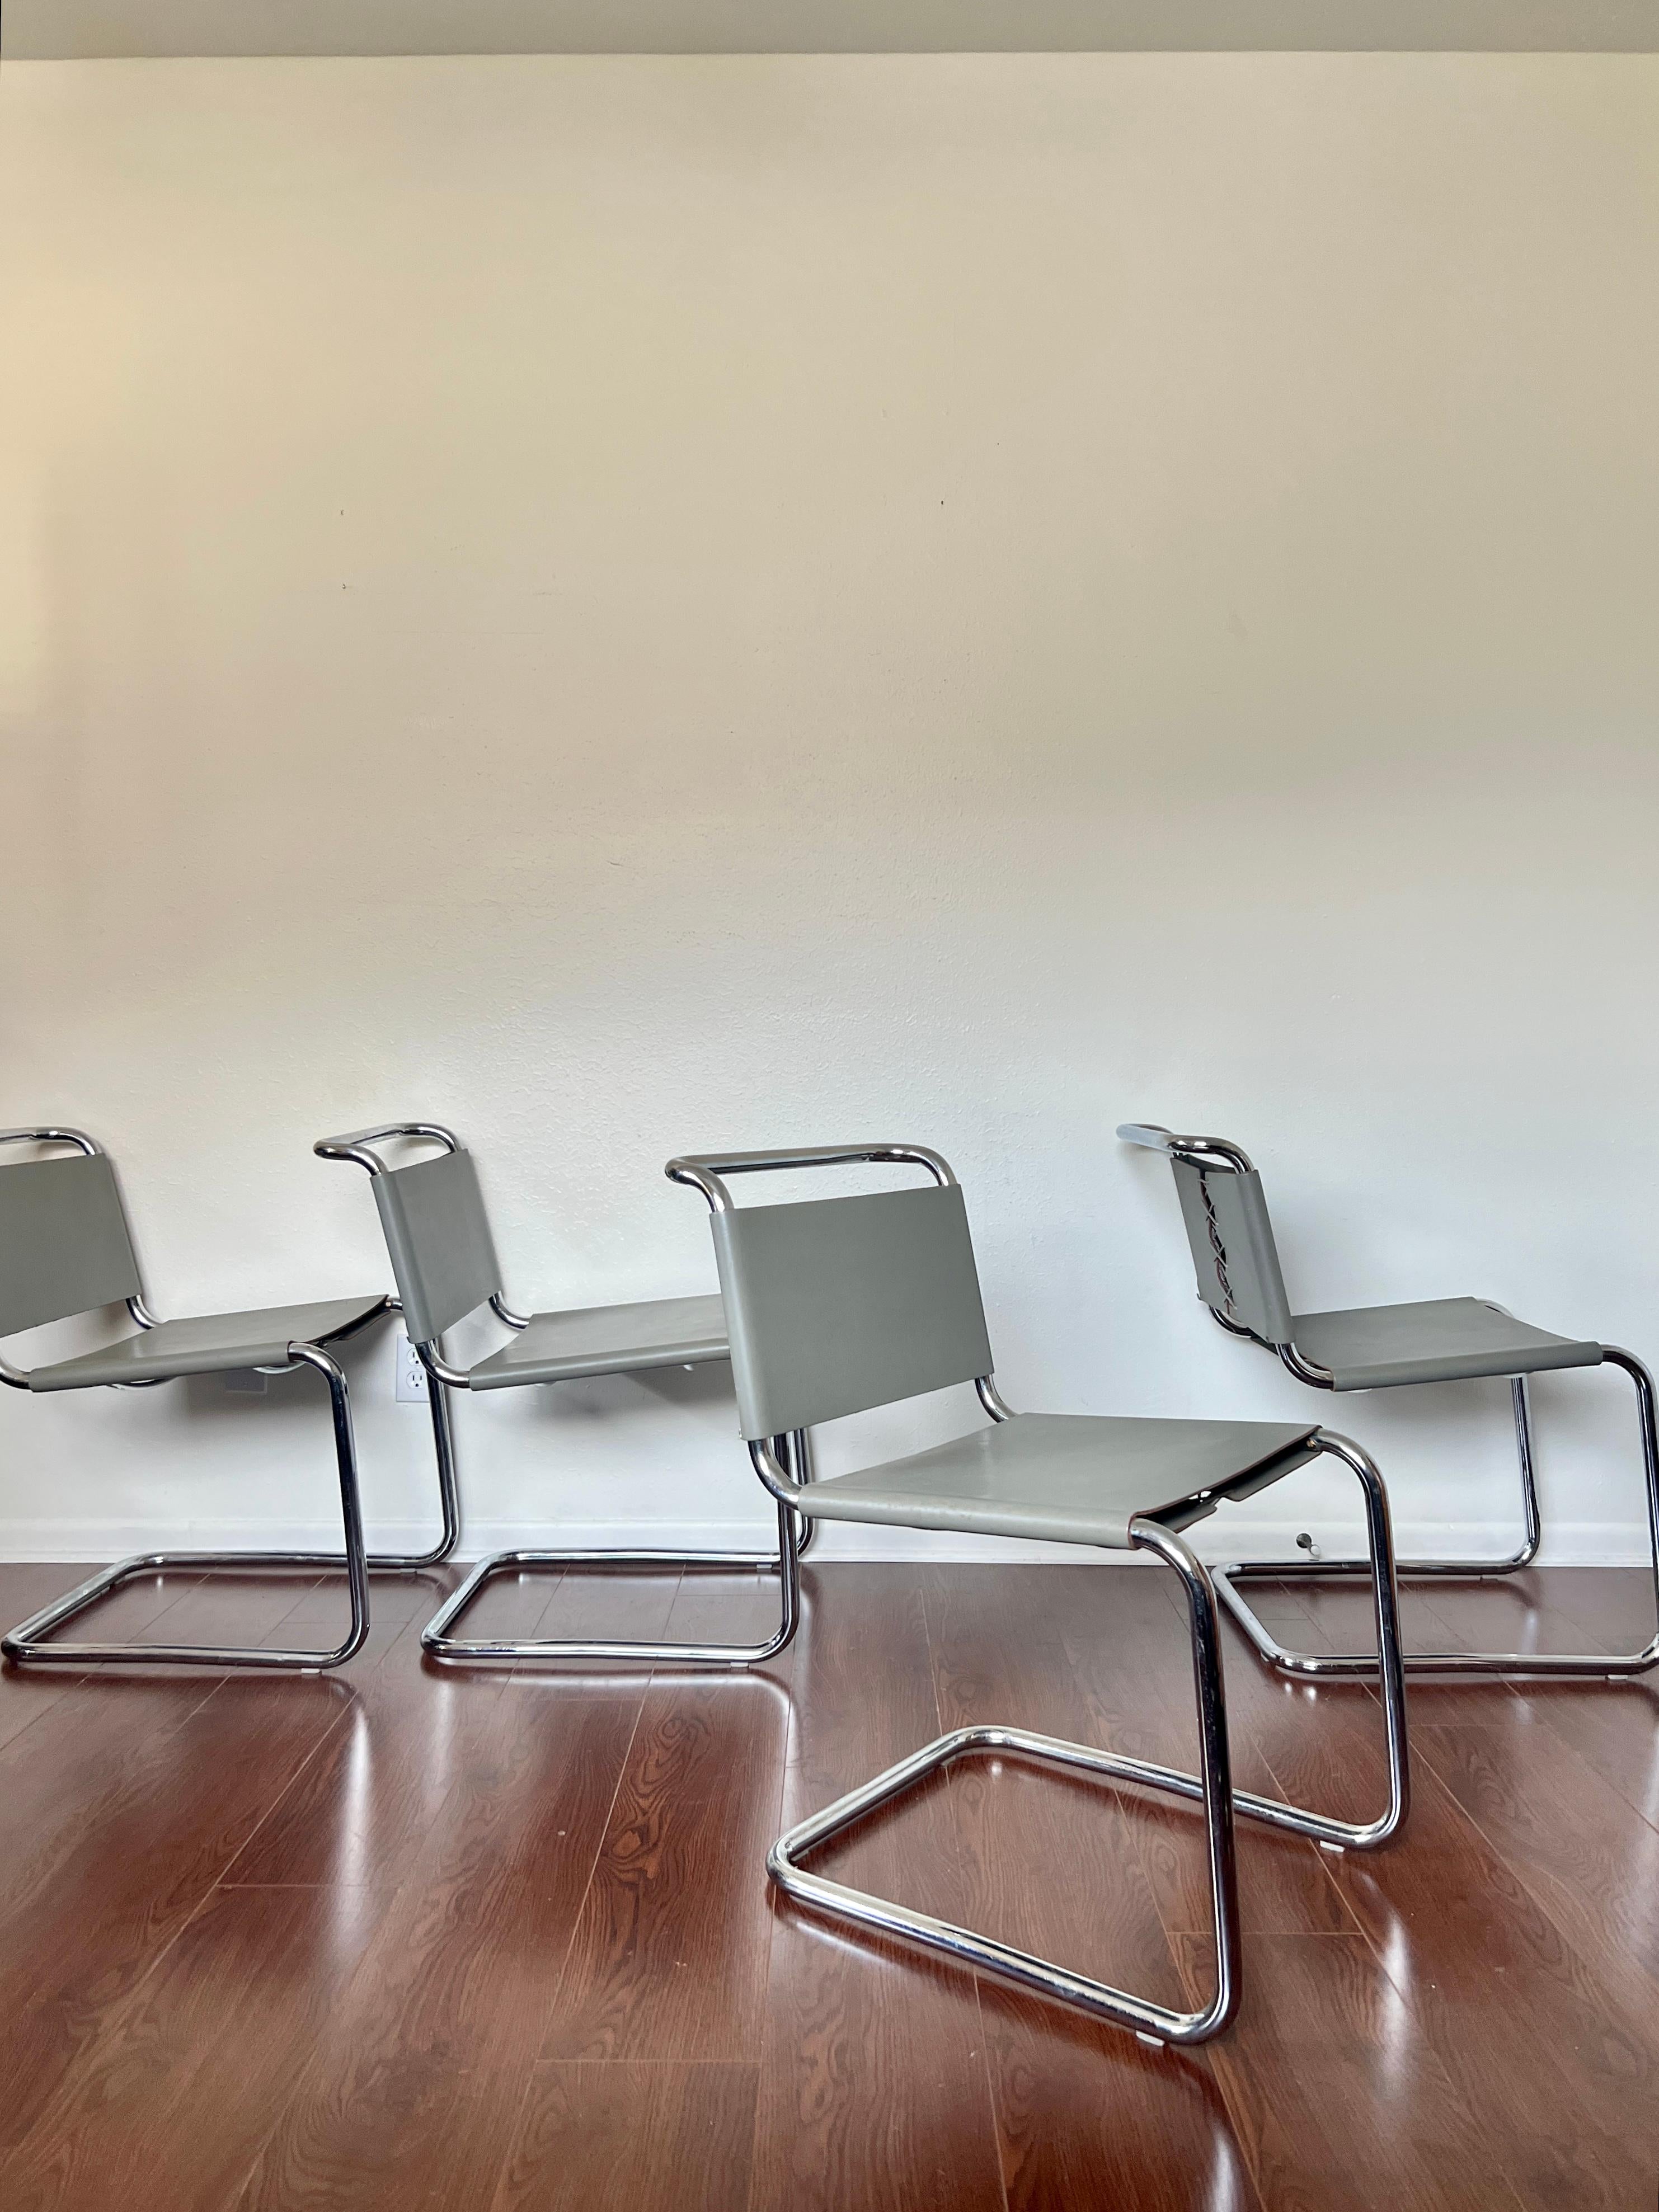 A set of 4 Spoleto B33 chairs by Marcel Breuer for Knoll. Seamless, tubular steel frame, cowhide leather, and Knoll label still attached with “made in Italy.” In excellent condition.?
“Ufficio Tecnico's 1971 Spoleto chair provides a cantilevered,